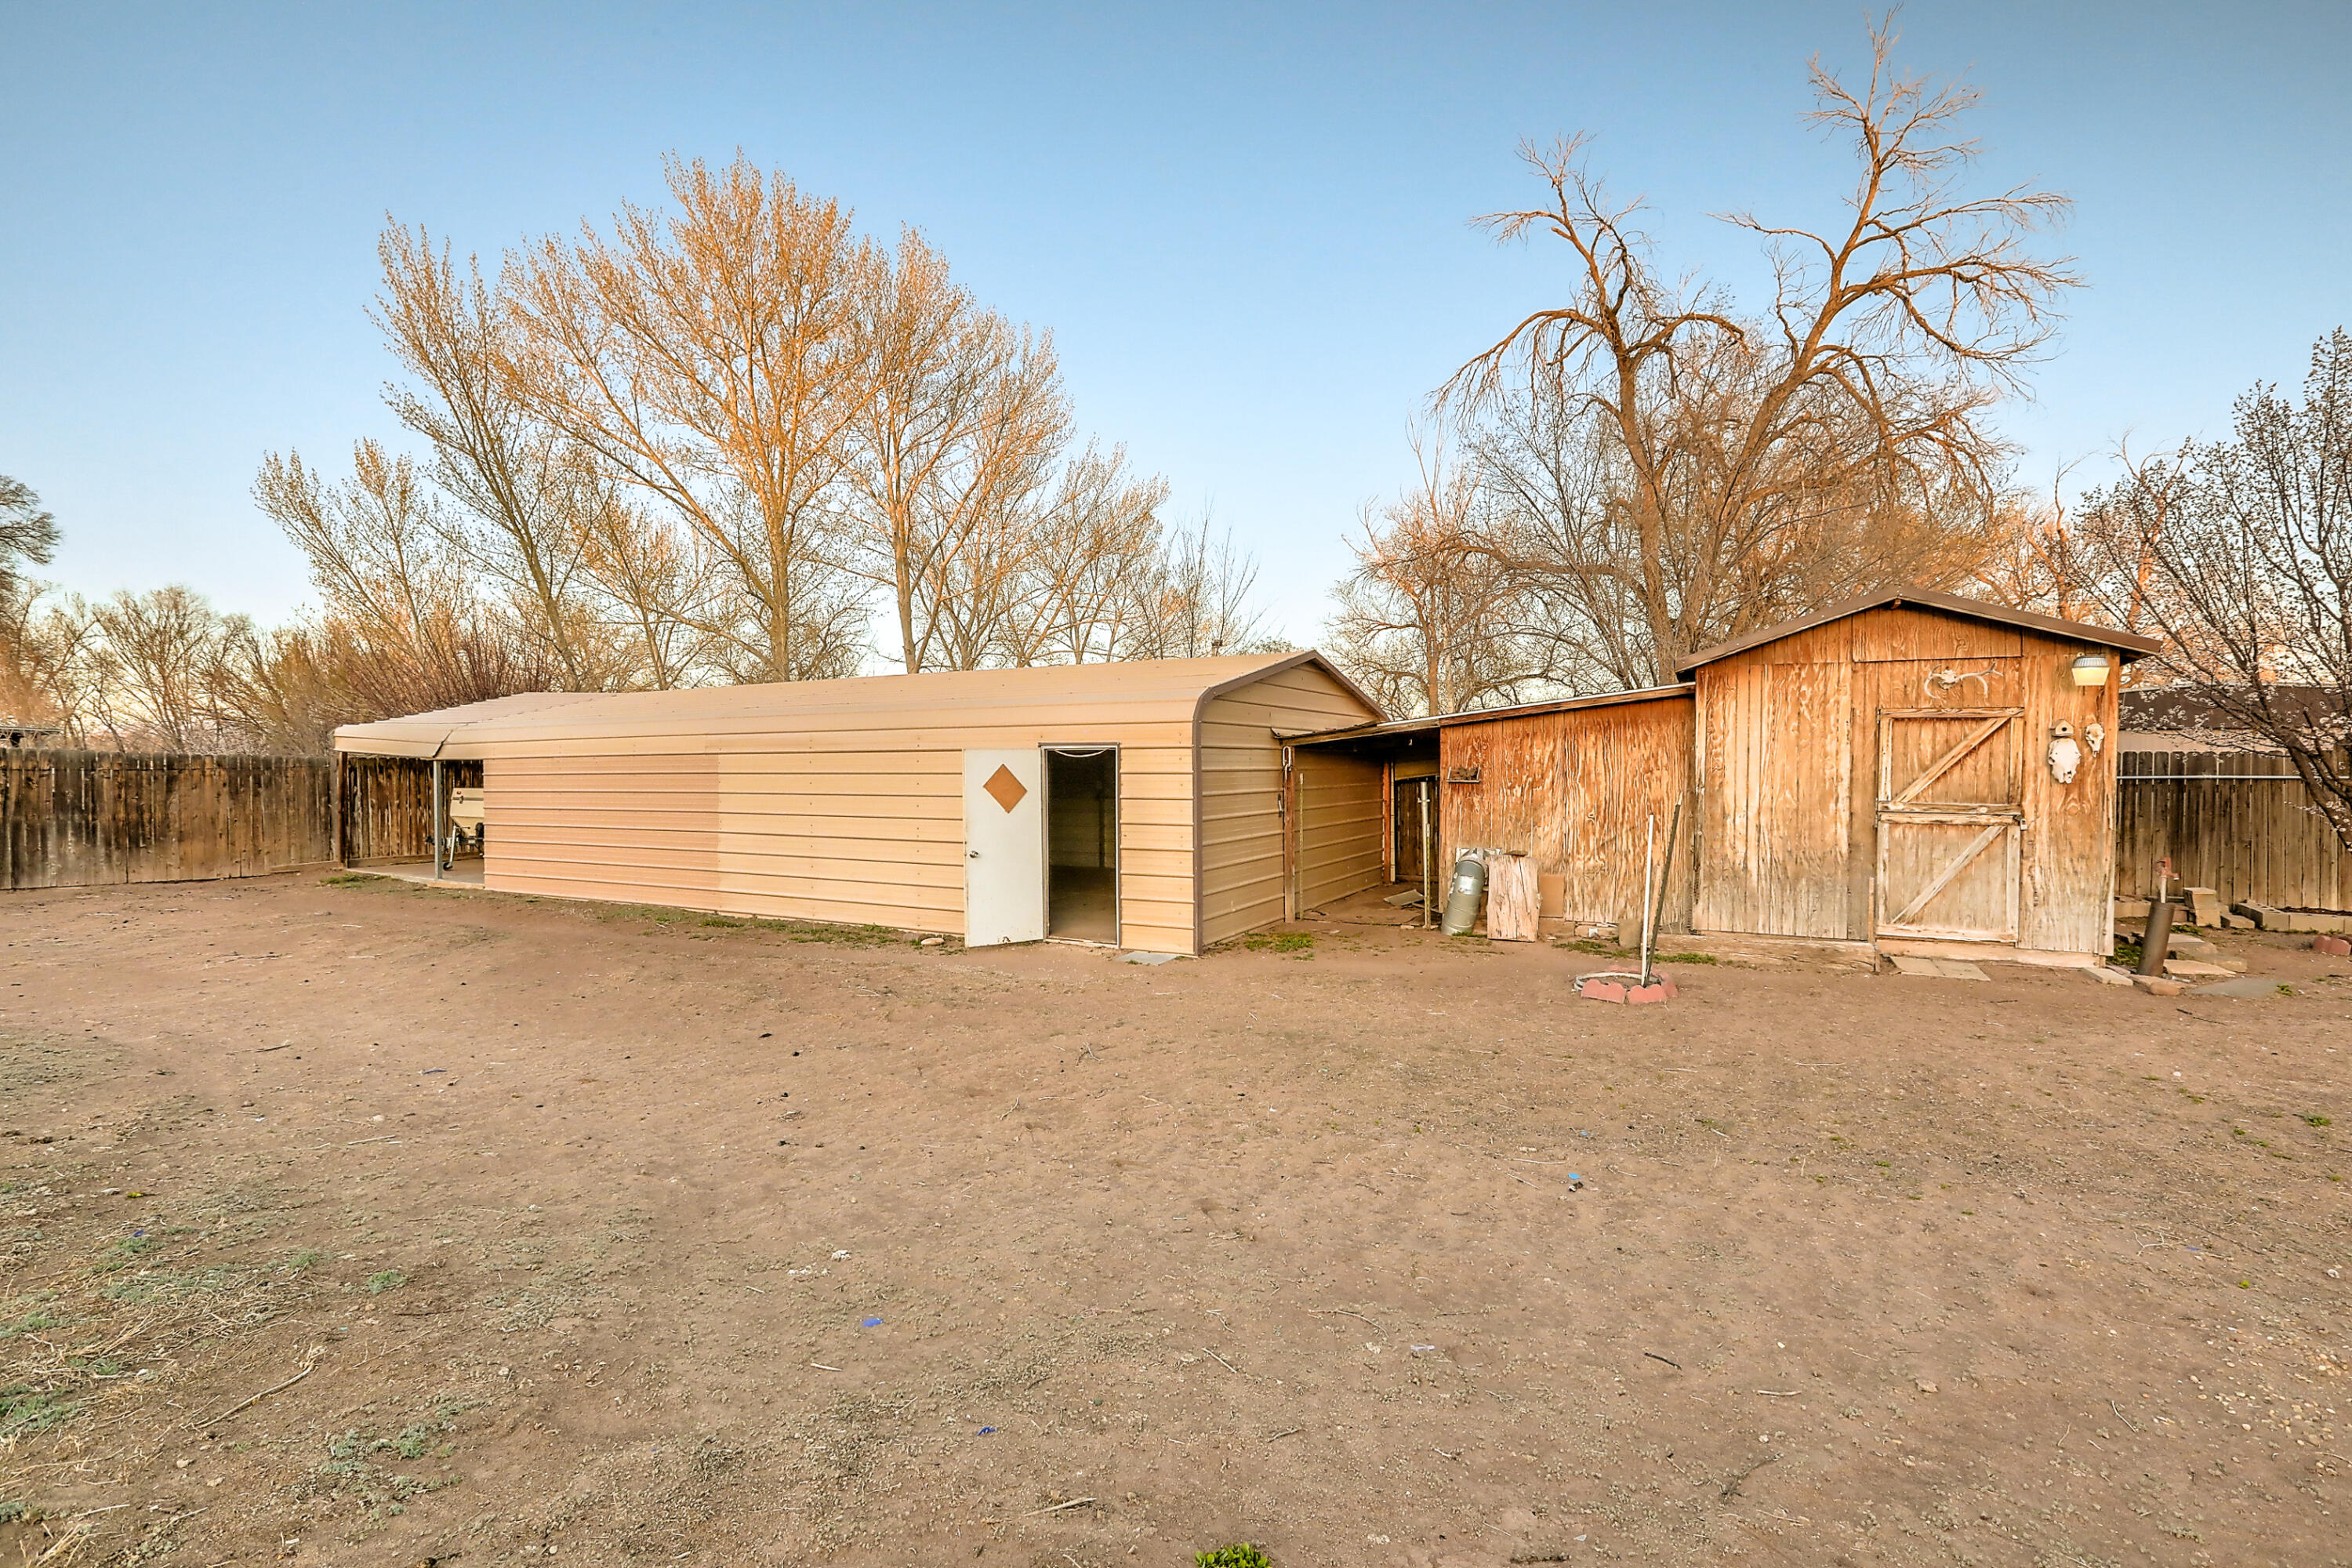 29 Don Jacobo Road, Peralta, New Mexico 87042, 3 Bedrooms Bedrooms, ,2 BathroomsBathrooms,Residential,For Sale,29 Don Jacobo Road,1059284